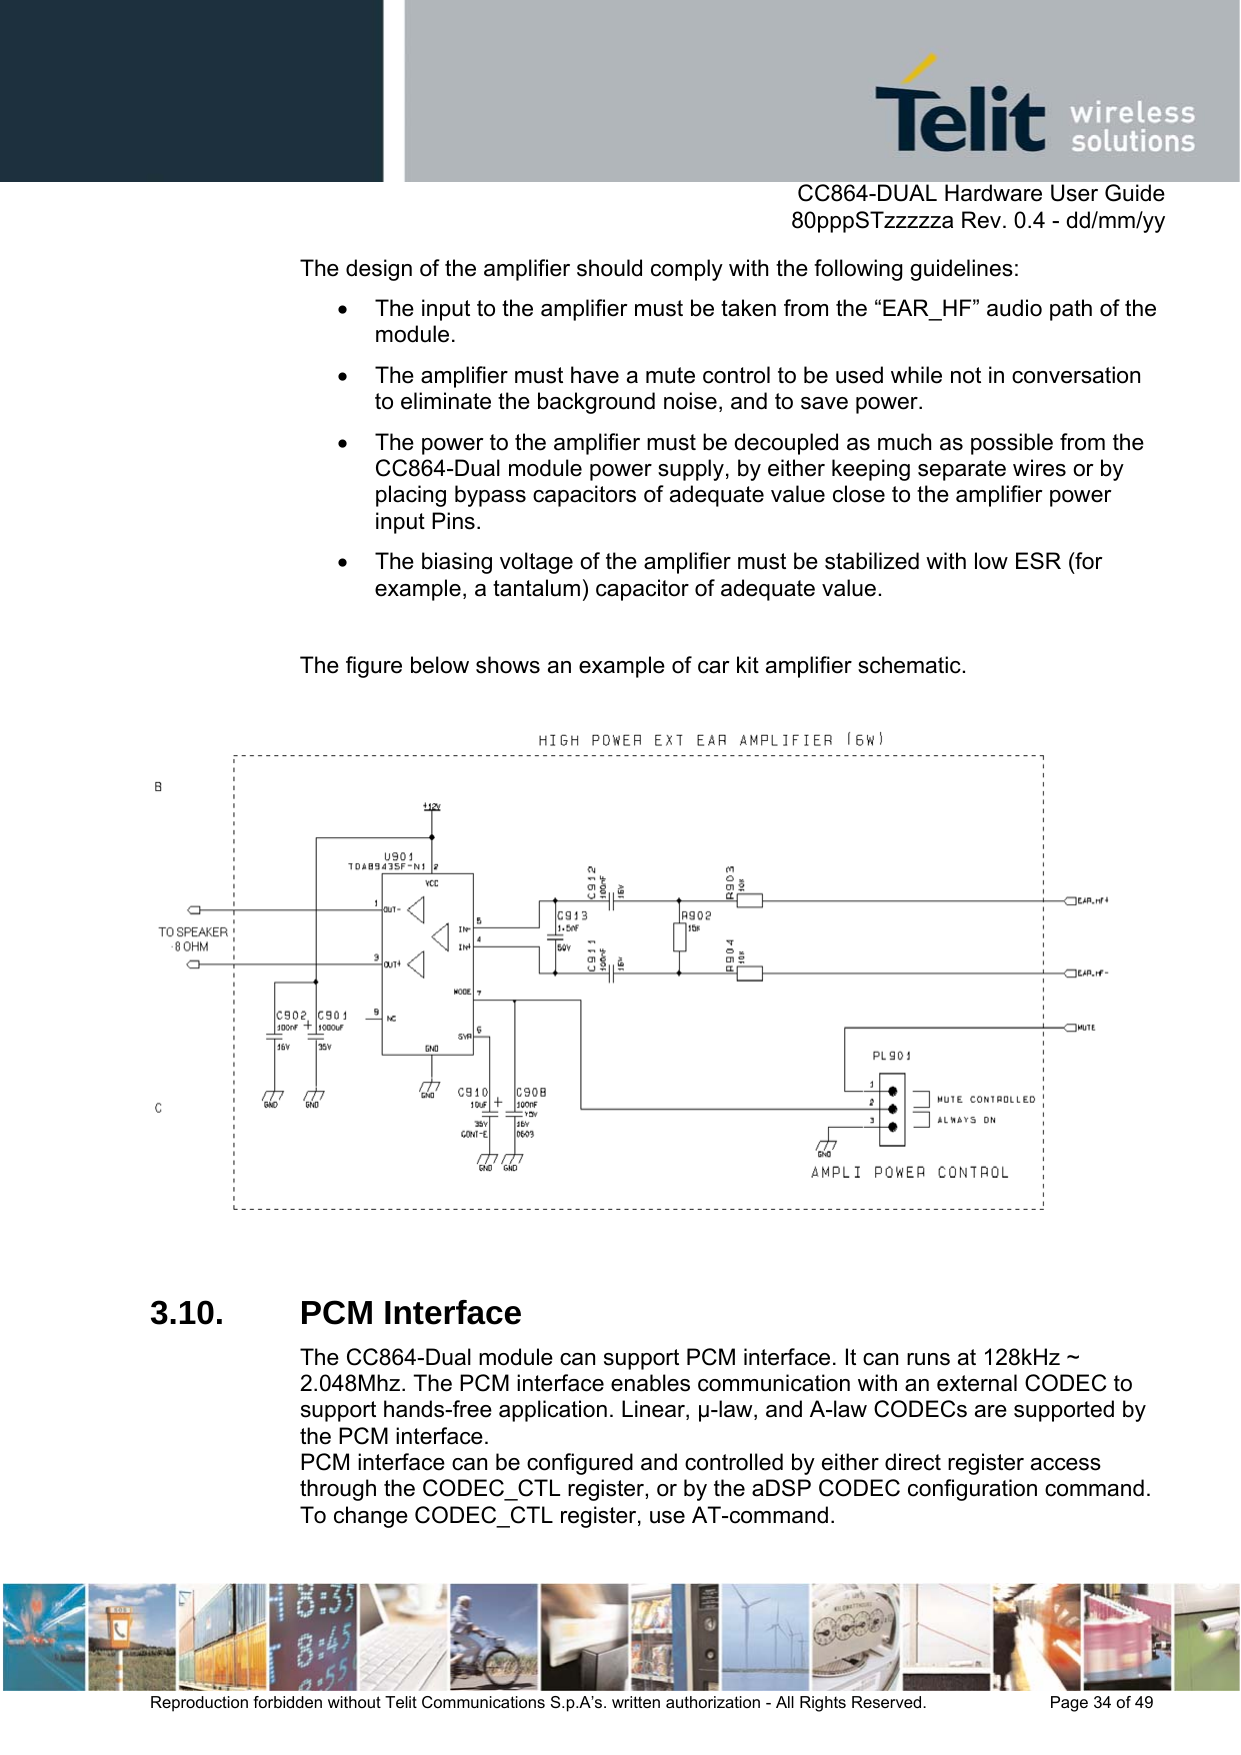      CC864-DUAL Hardware User Guide   80pppSTzzzzza Rev. 0.4 - dd/mm/yy   Reproduction forbidden without Telit Communications S.p.A’s. written authorization - All Rights Reserved.    Page 34 of 49  The design of the amplifier should comply with the following guidelines: •  The input to the amplifier must be taken from the “EAR_HF” audio path of the module. •  The amplifier must have a mute control to be used while not in conversation to eliminate the background noise, and to save power.  •  The power to the amplifier must be decoupled as much as possible from the CC864-Dual module power supply, by either keeping separate wires or by placing bypass capacitors of adequate value close to the amplifier power input Pins. •  The biasing voltage of the amplifier must be stabilized with low ESR (for example, a tantalum) capacitor of adequate value.  The figure below shows an example of car kit amplifier schematic.     3.10. PCM Interface The CC864-Dual module can support PCM interface. It can runs at 128kHz ~ 2.048Mhz. The PCM interface enables communication with an external CODEC to support hands-free application. Linear, -law, and A-law CODECs are supported by the PCM interface. PCM interface can be configured and controlled by either direct register access through the CODEC_CTL register, or by the aDSP CODEC configuration command.  To change CODEC_CTL register, use AT-command.   